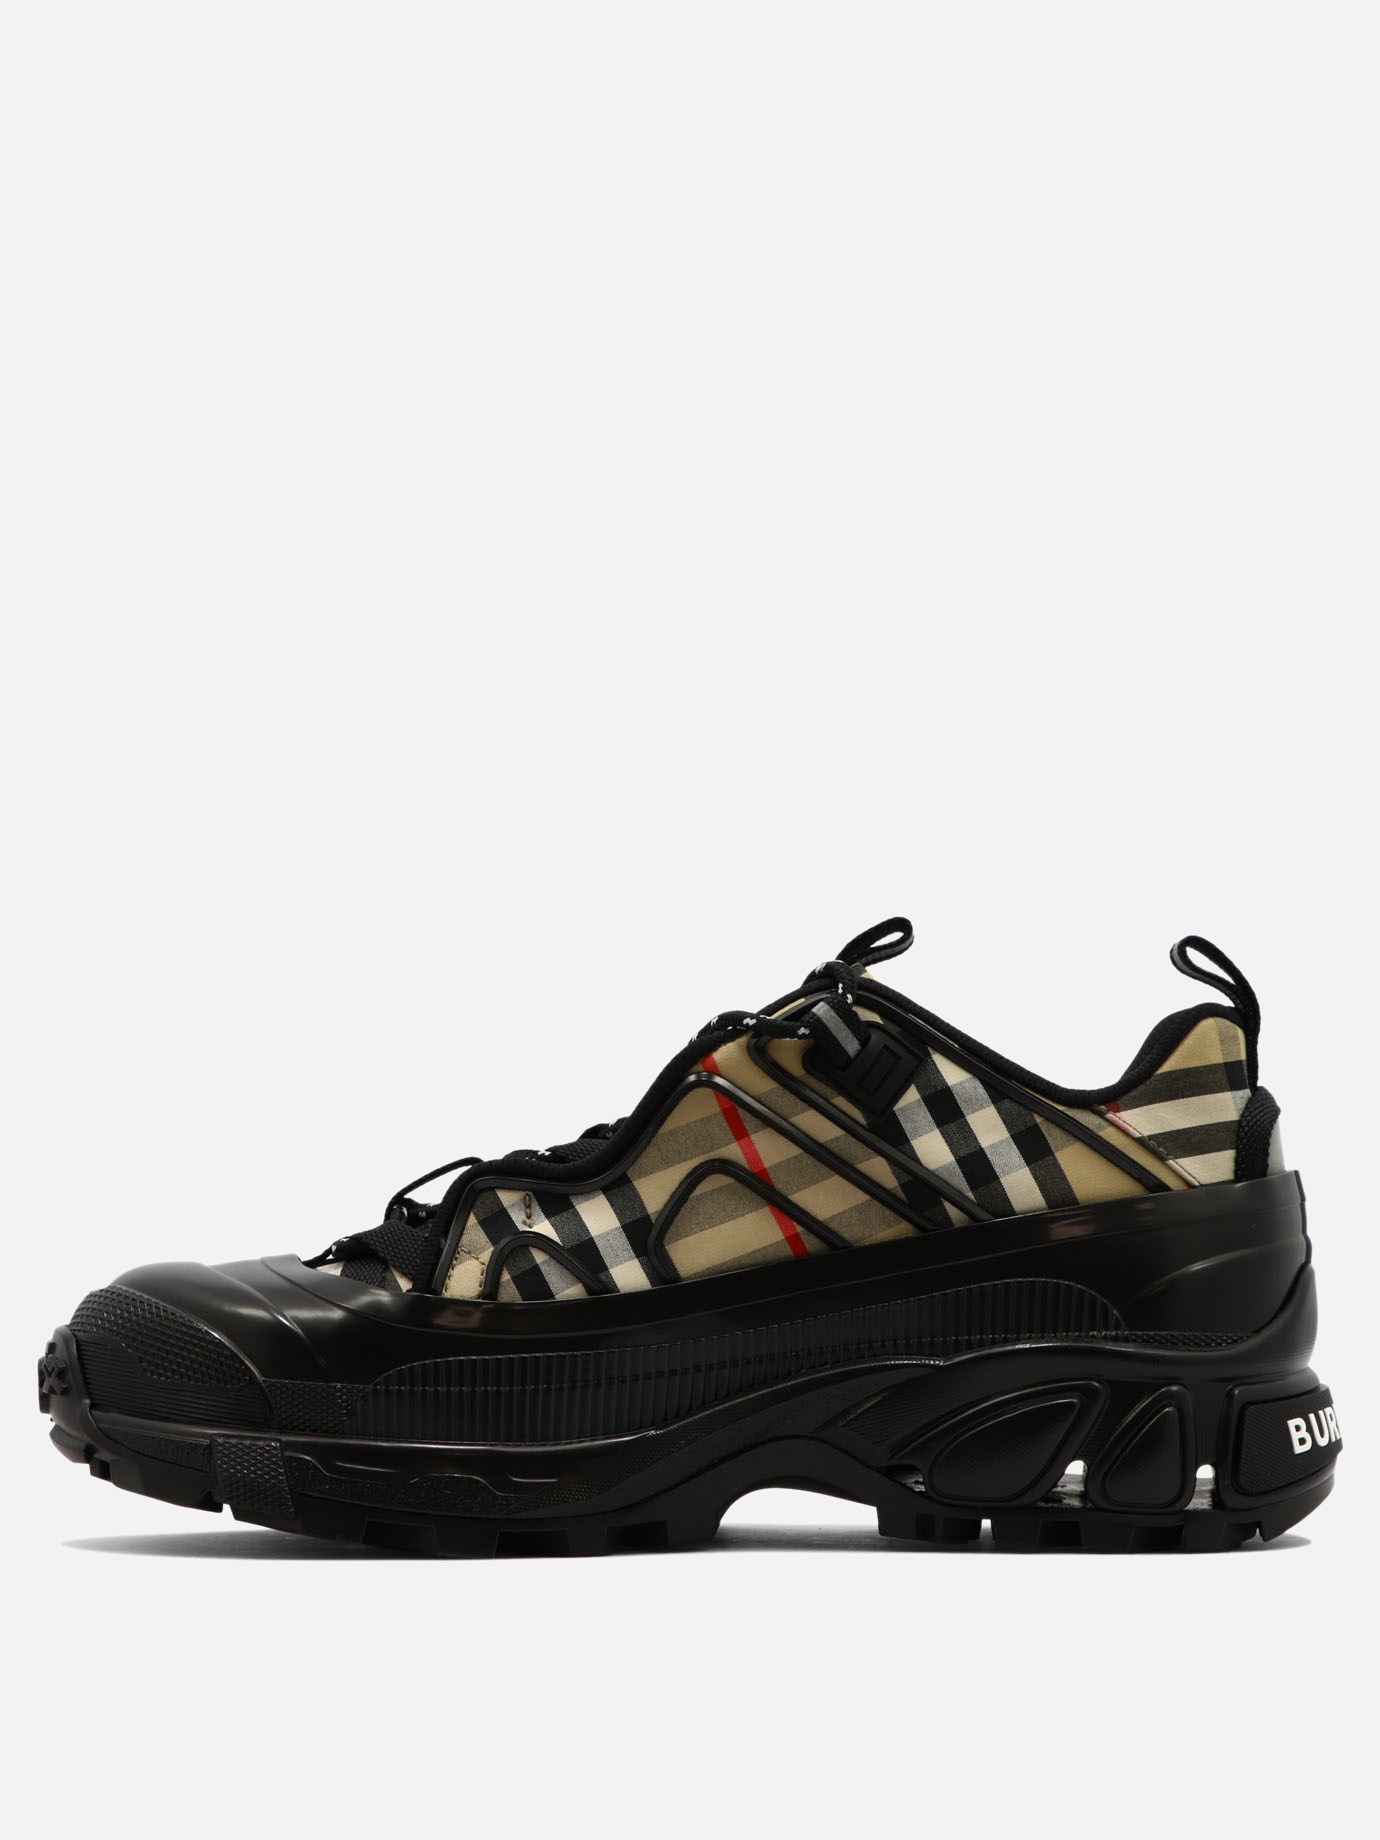  Arthur  sneakers by Burberry